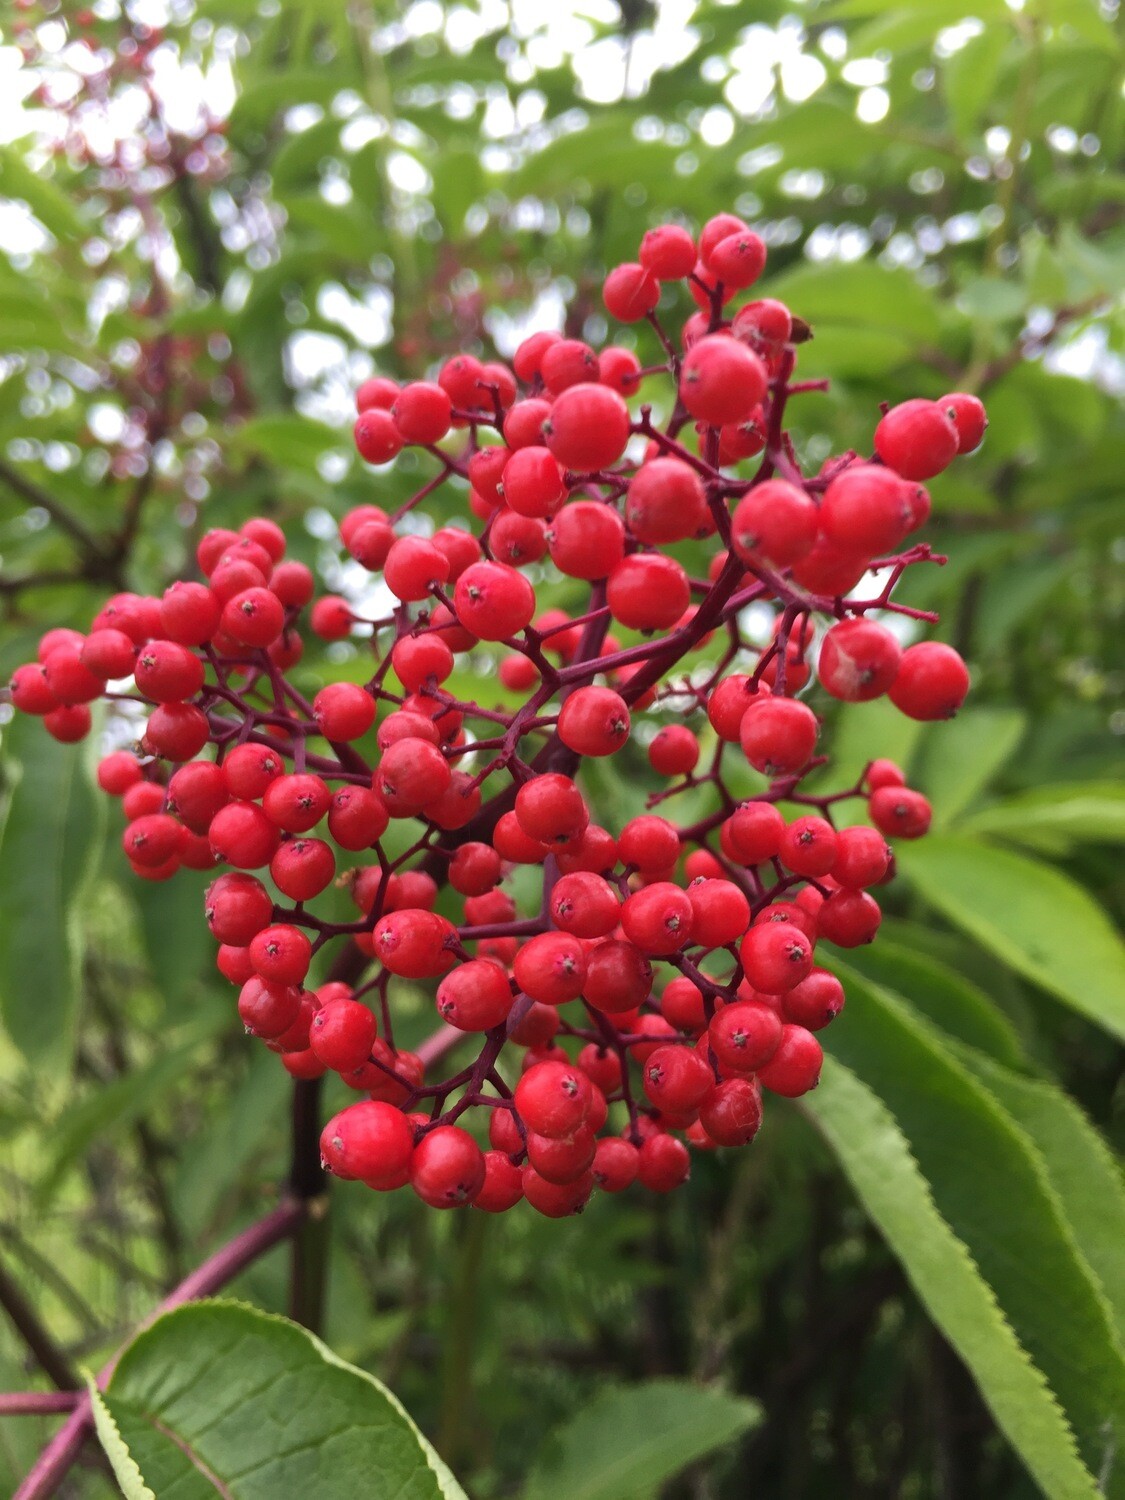 An elderberry plant with a cluster of bright red berries on a red stem. Leaves are green with serrated edges.